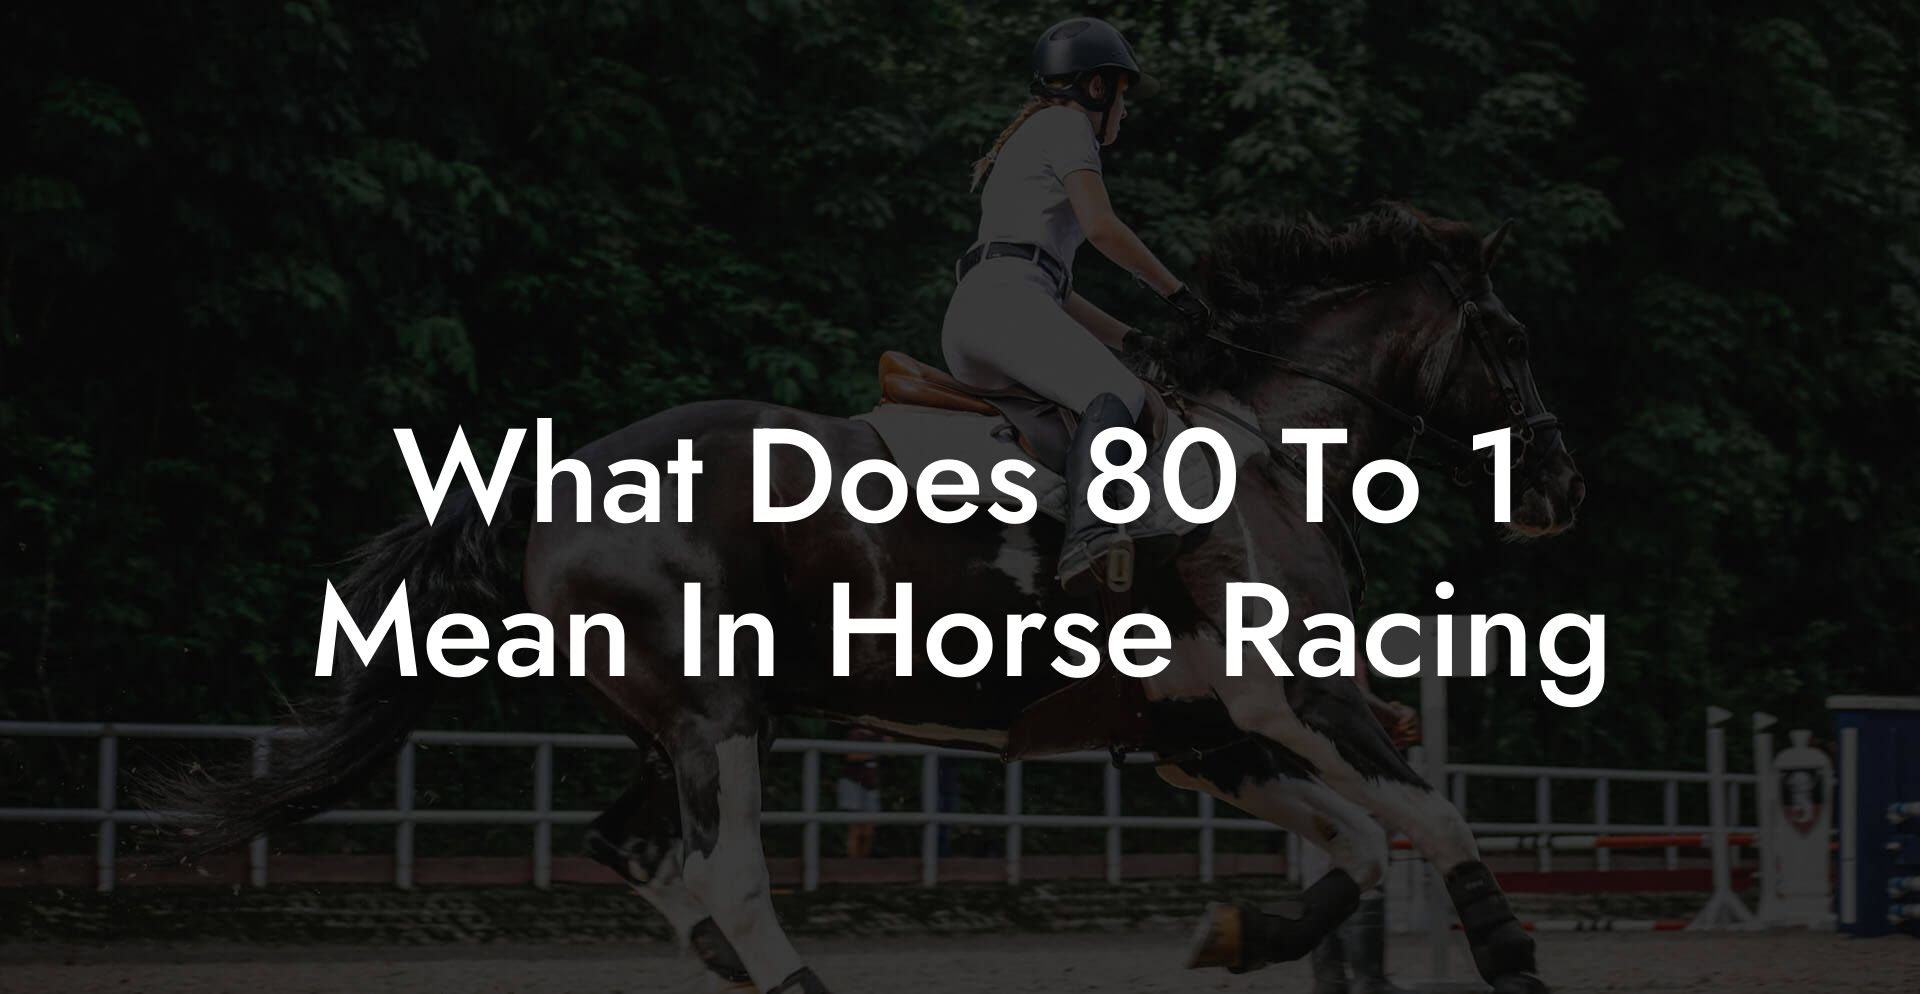 What Does 80 To 1 Mean In Horse Racing